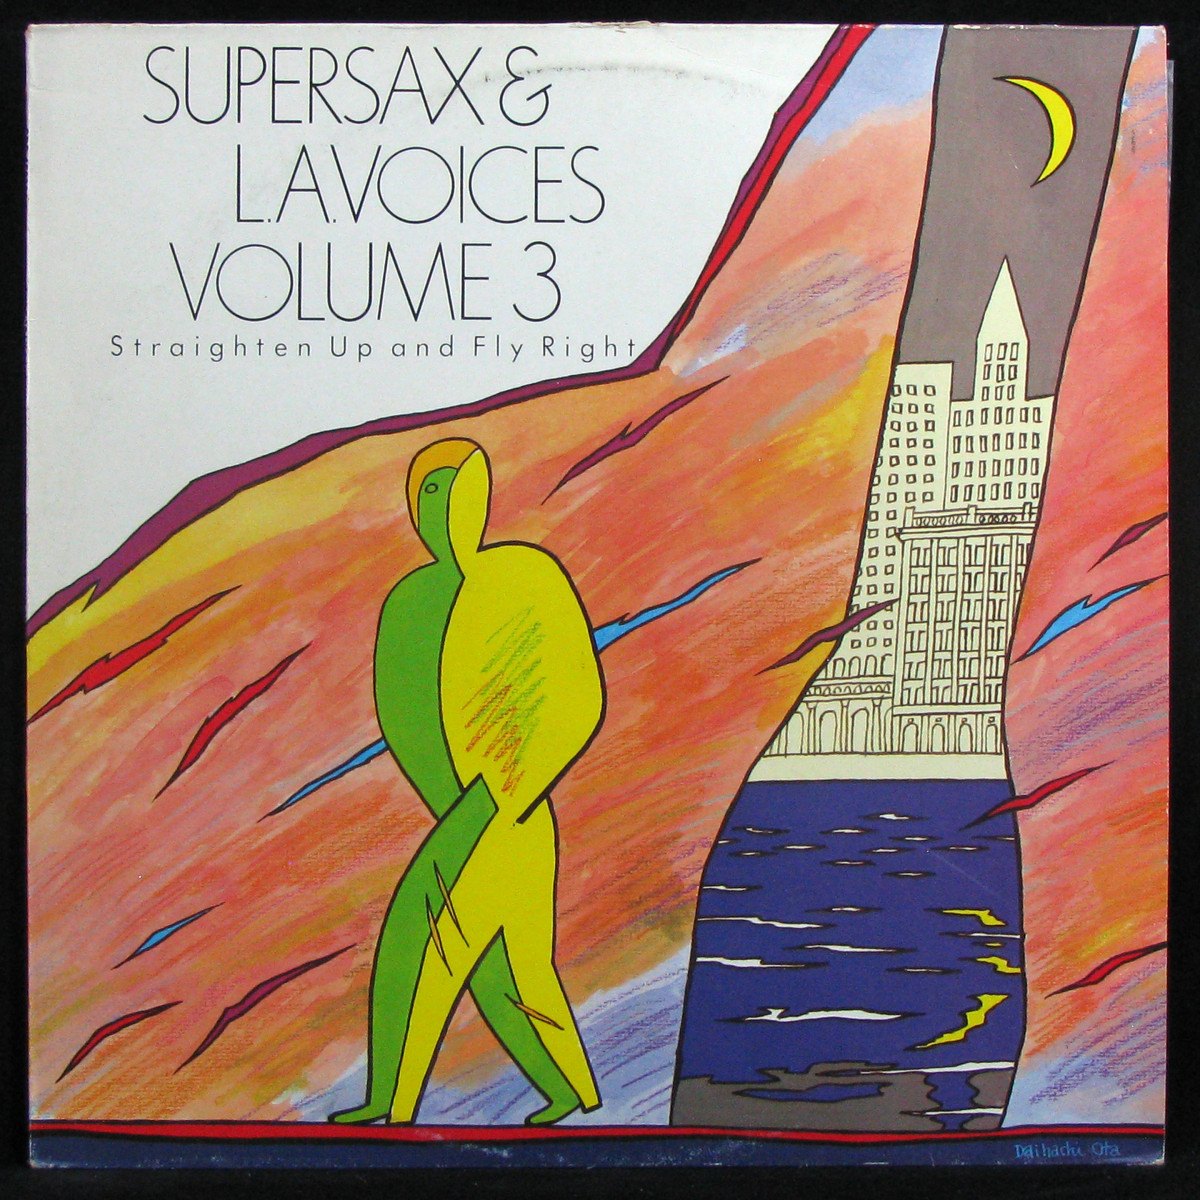 LP Supersax & L. A. Voices — Supersax & L.A. Voices Volume 3 - Straighten Up And Fly Right фото